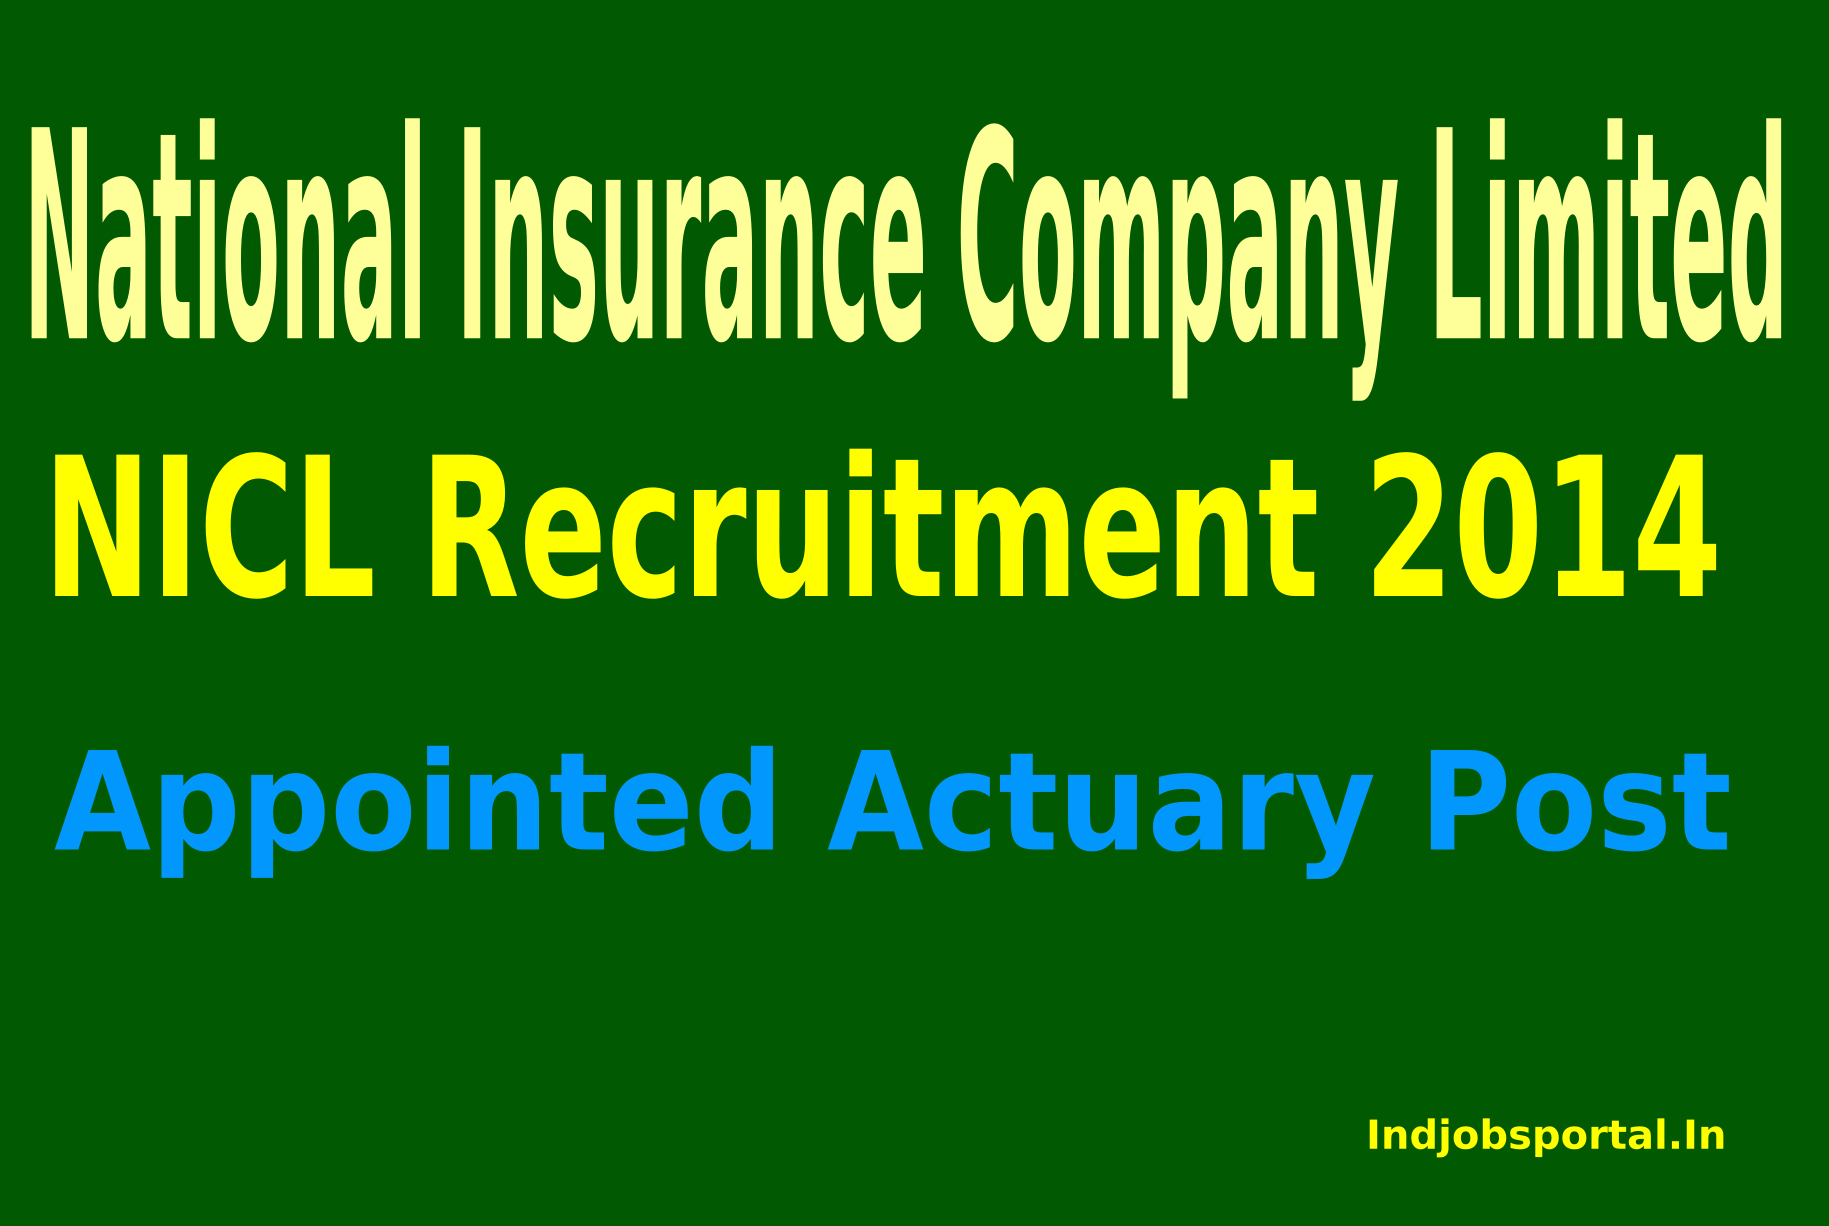 National Insurance Company Limited Recruitment 2015 For Appointed Actuary Post.